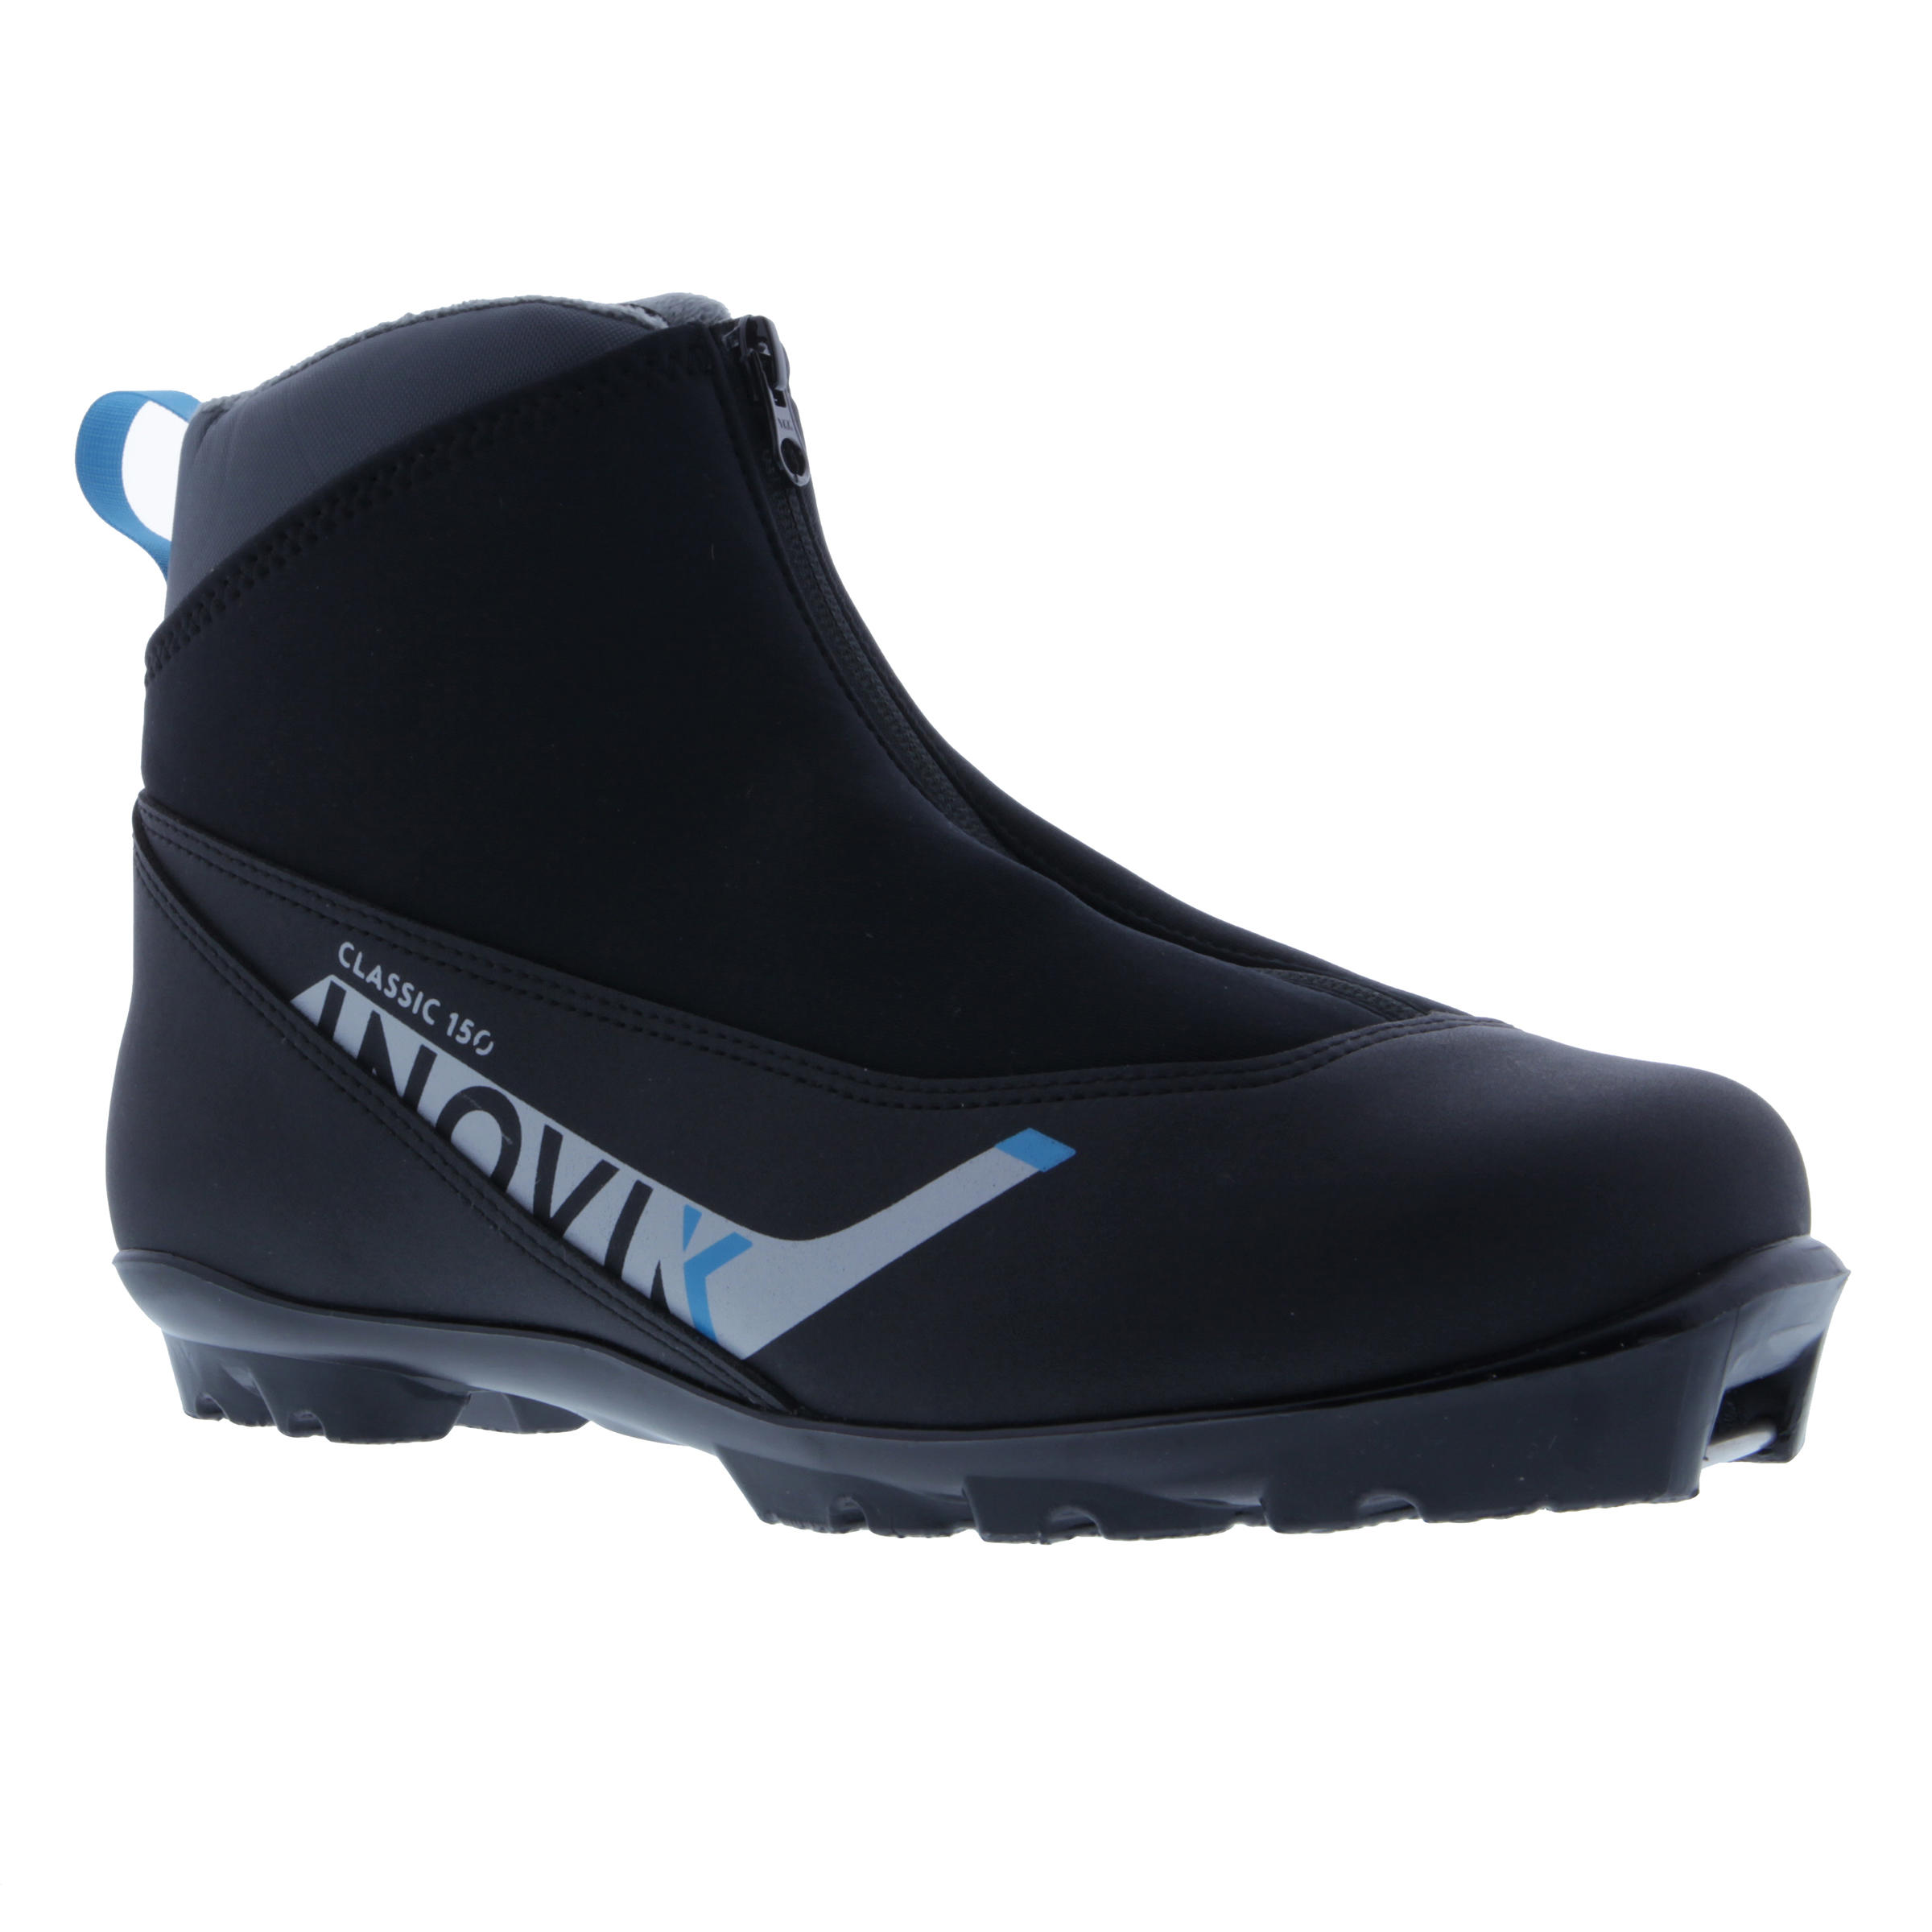 Kids' Classic Cross-Country Ski Boots 